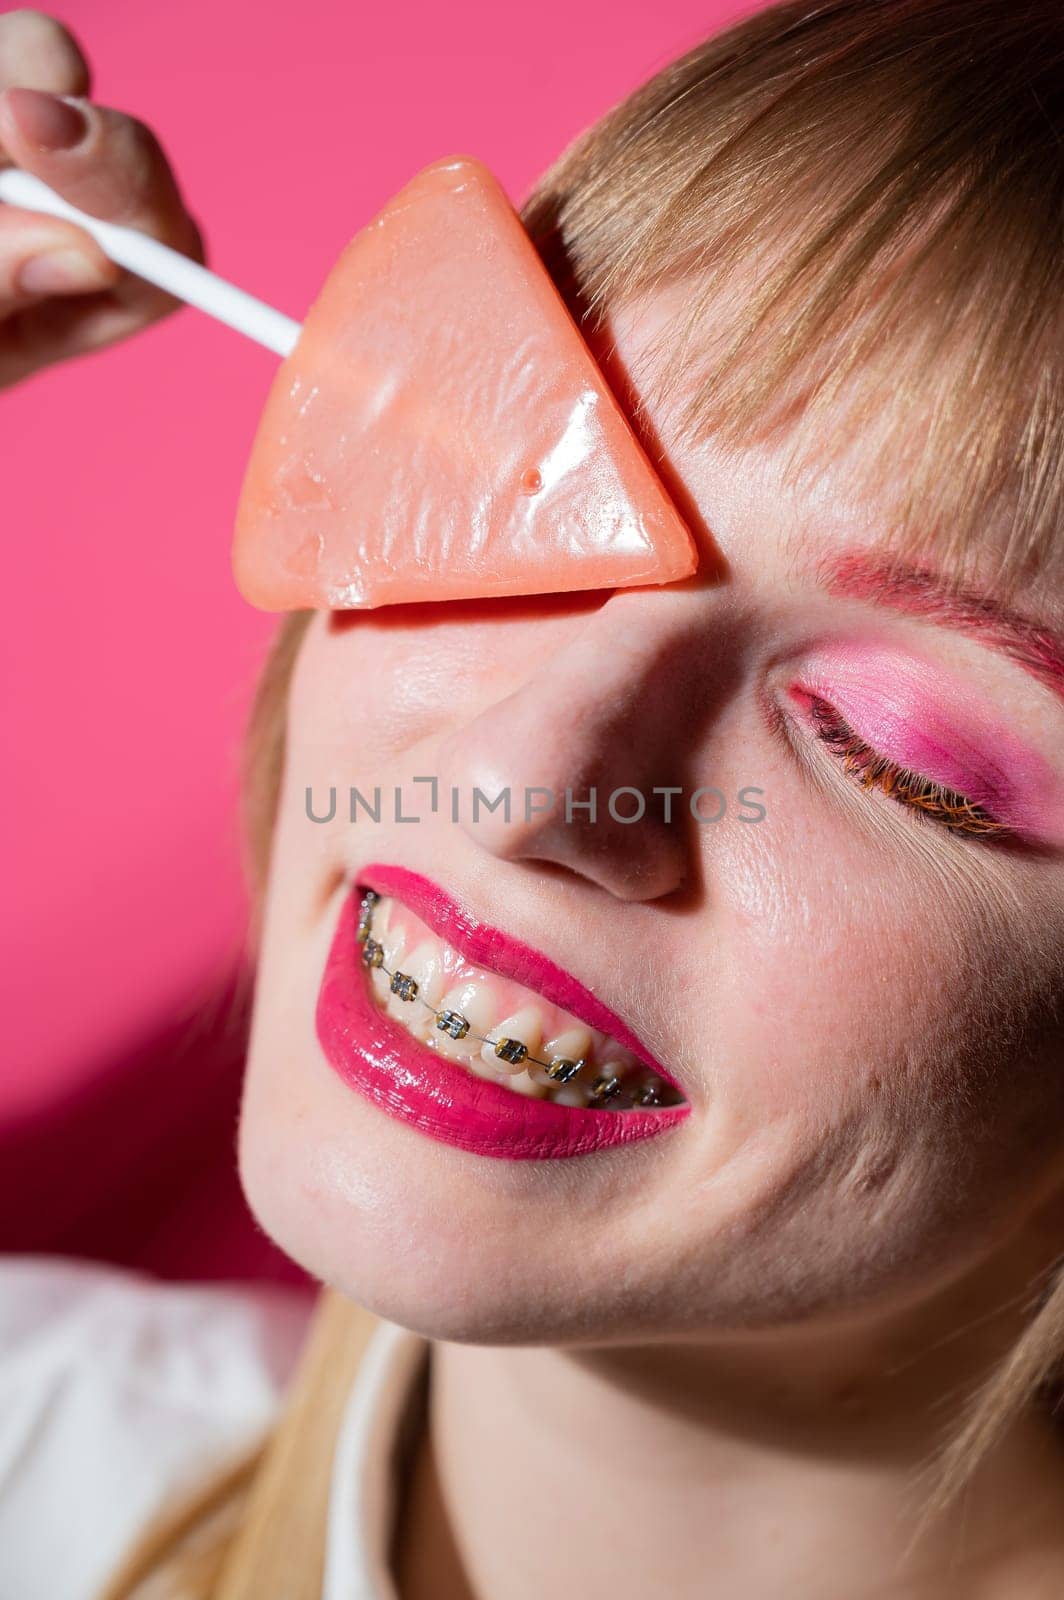 Portrait of a young woman with braces and bright makeup eating a lollipop on a pink background. Vertical photo